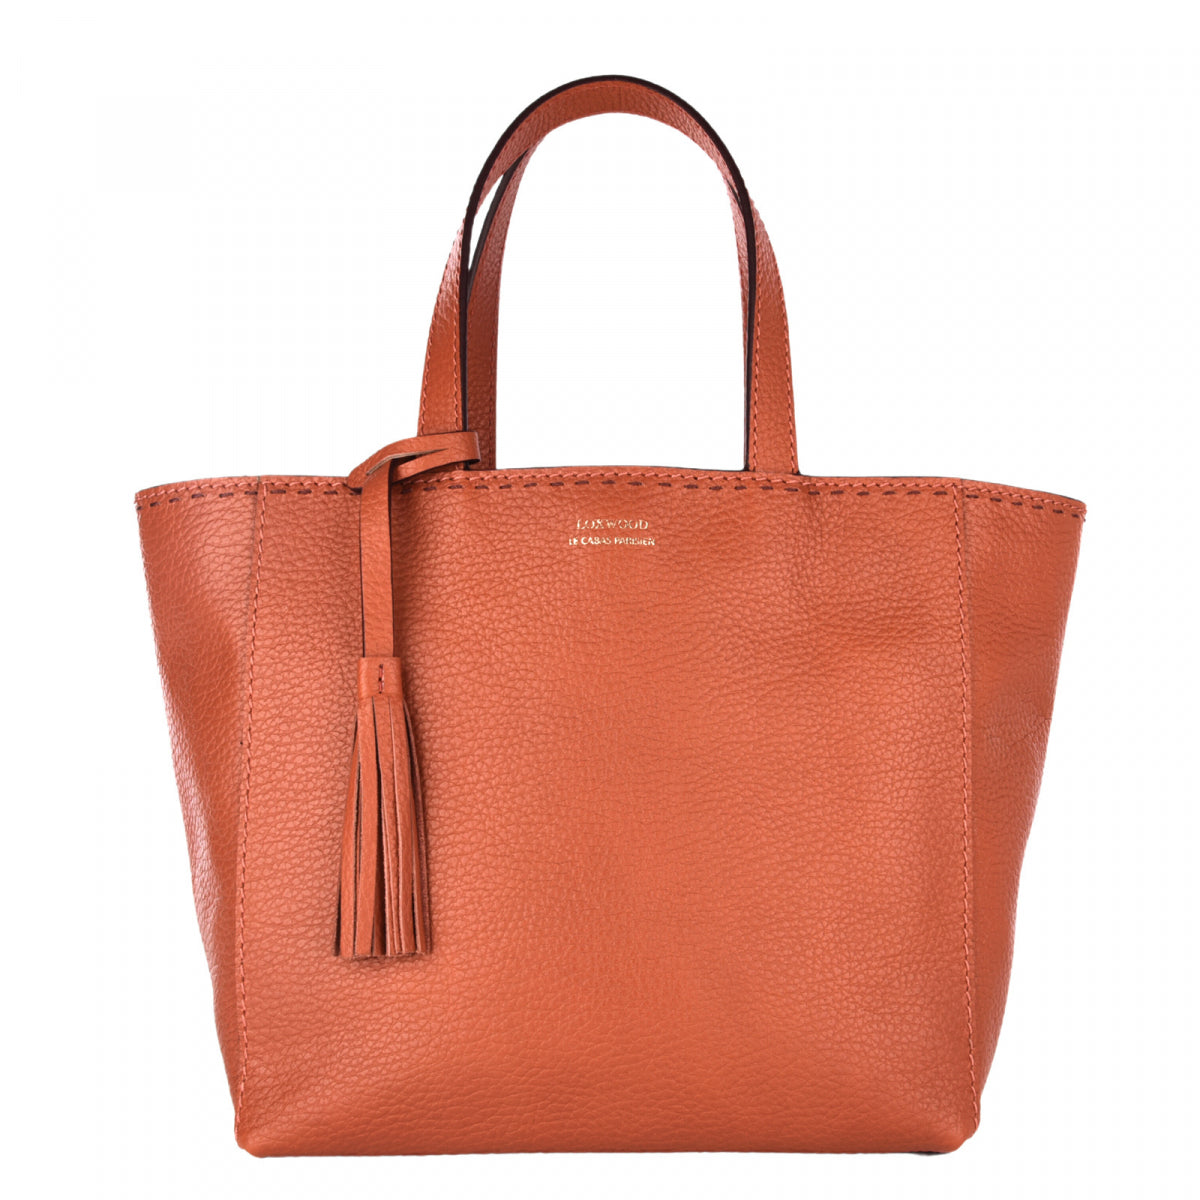 Parisian Loxwood tote bag for chic women in amber grained leather - Curling  Paris